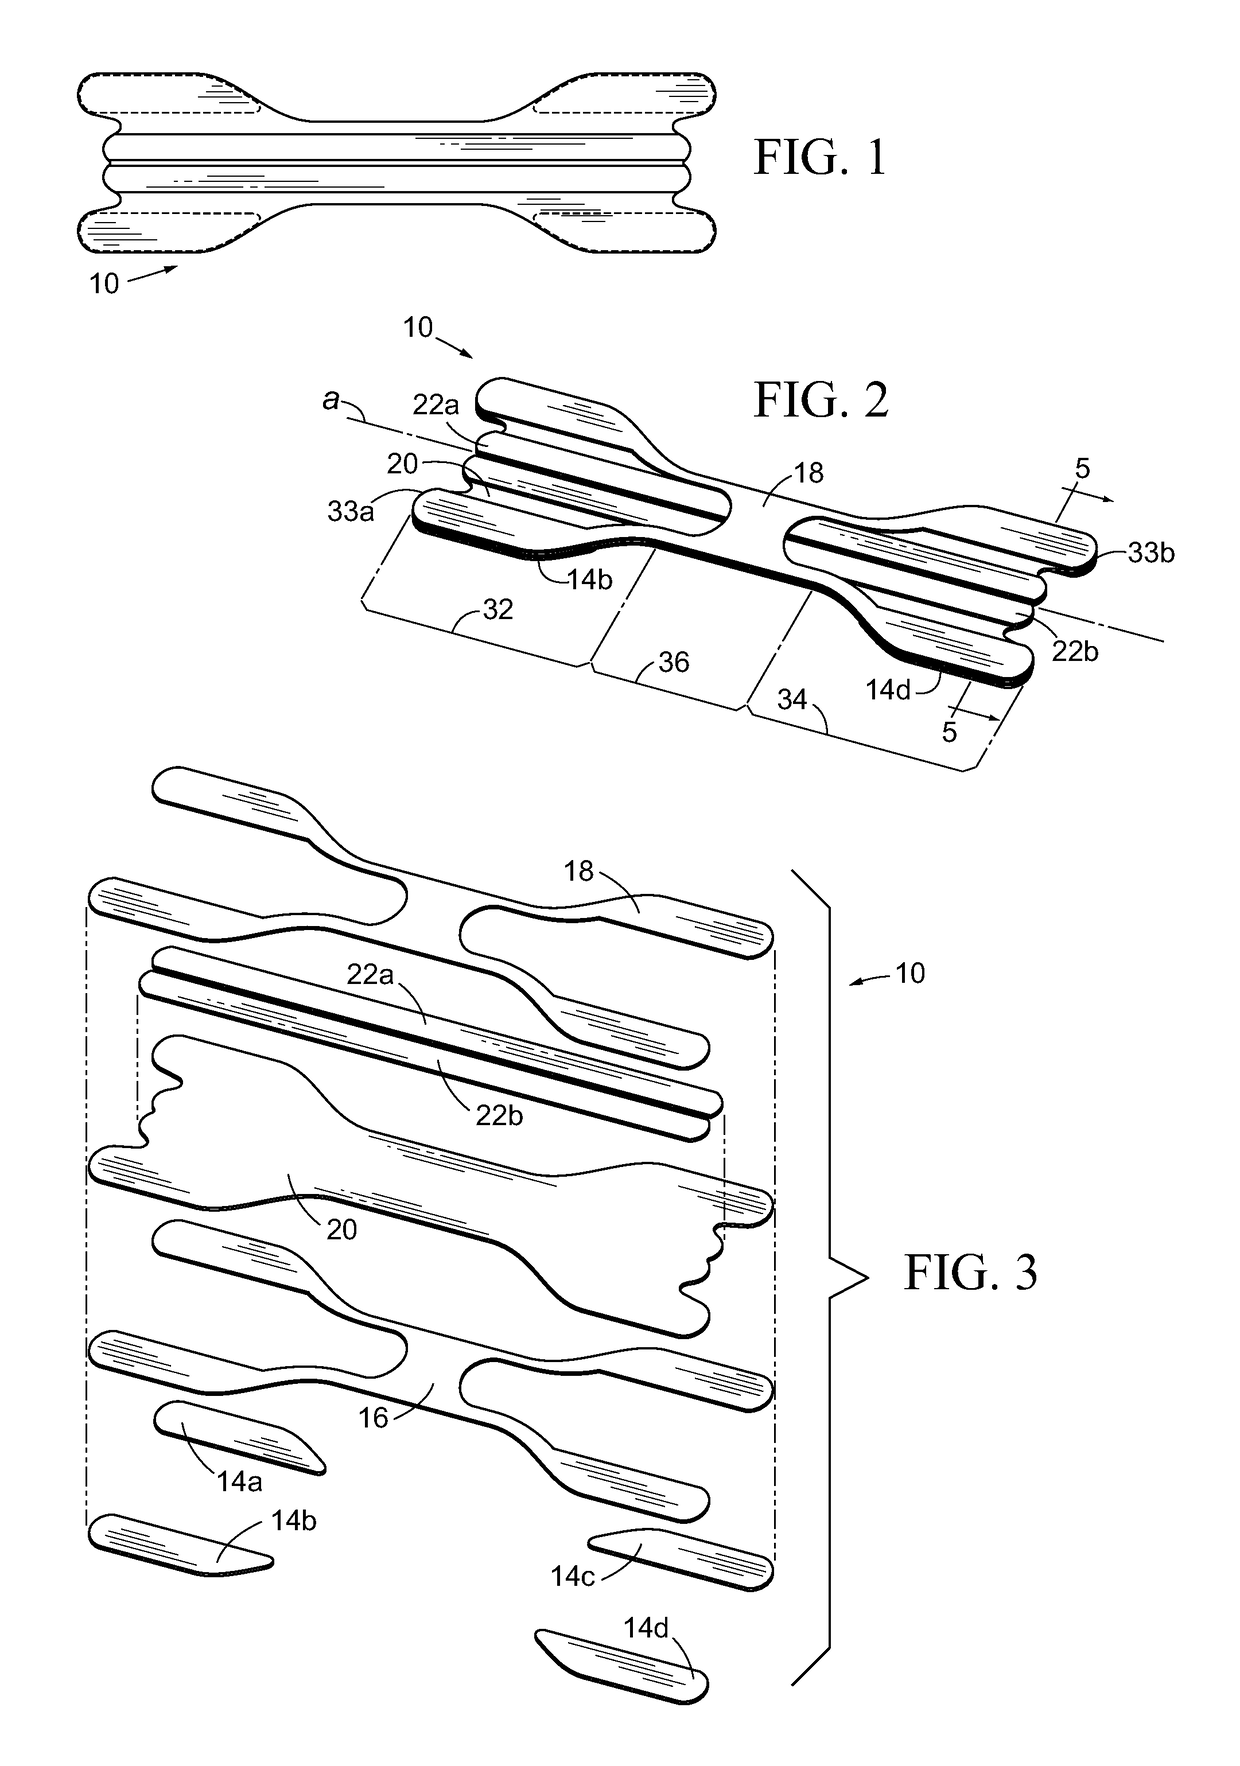 Nasal dilator with elastic membrane structure